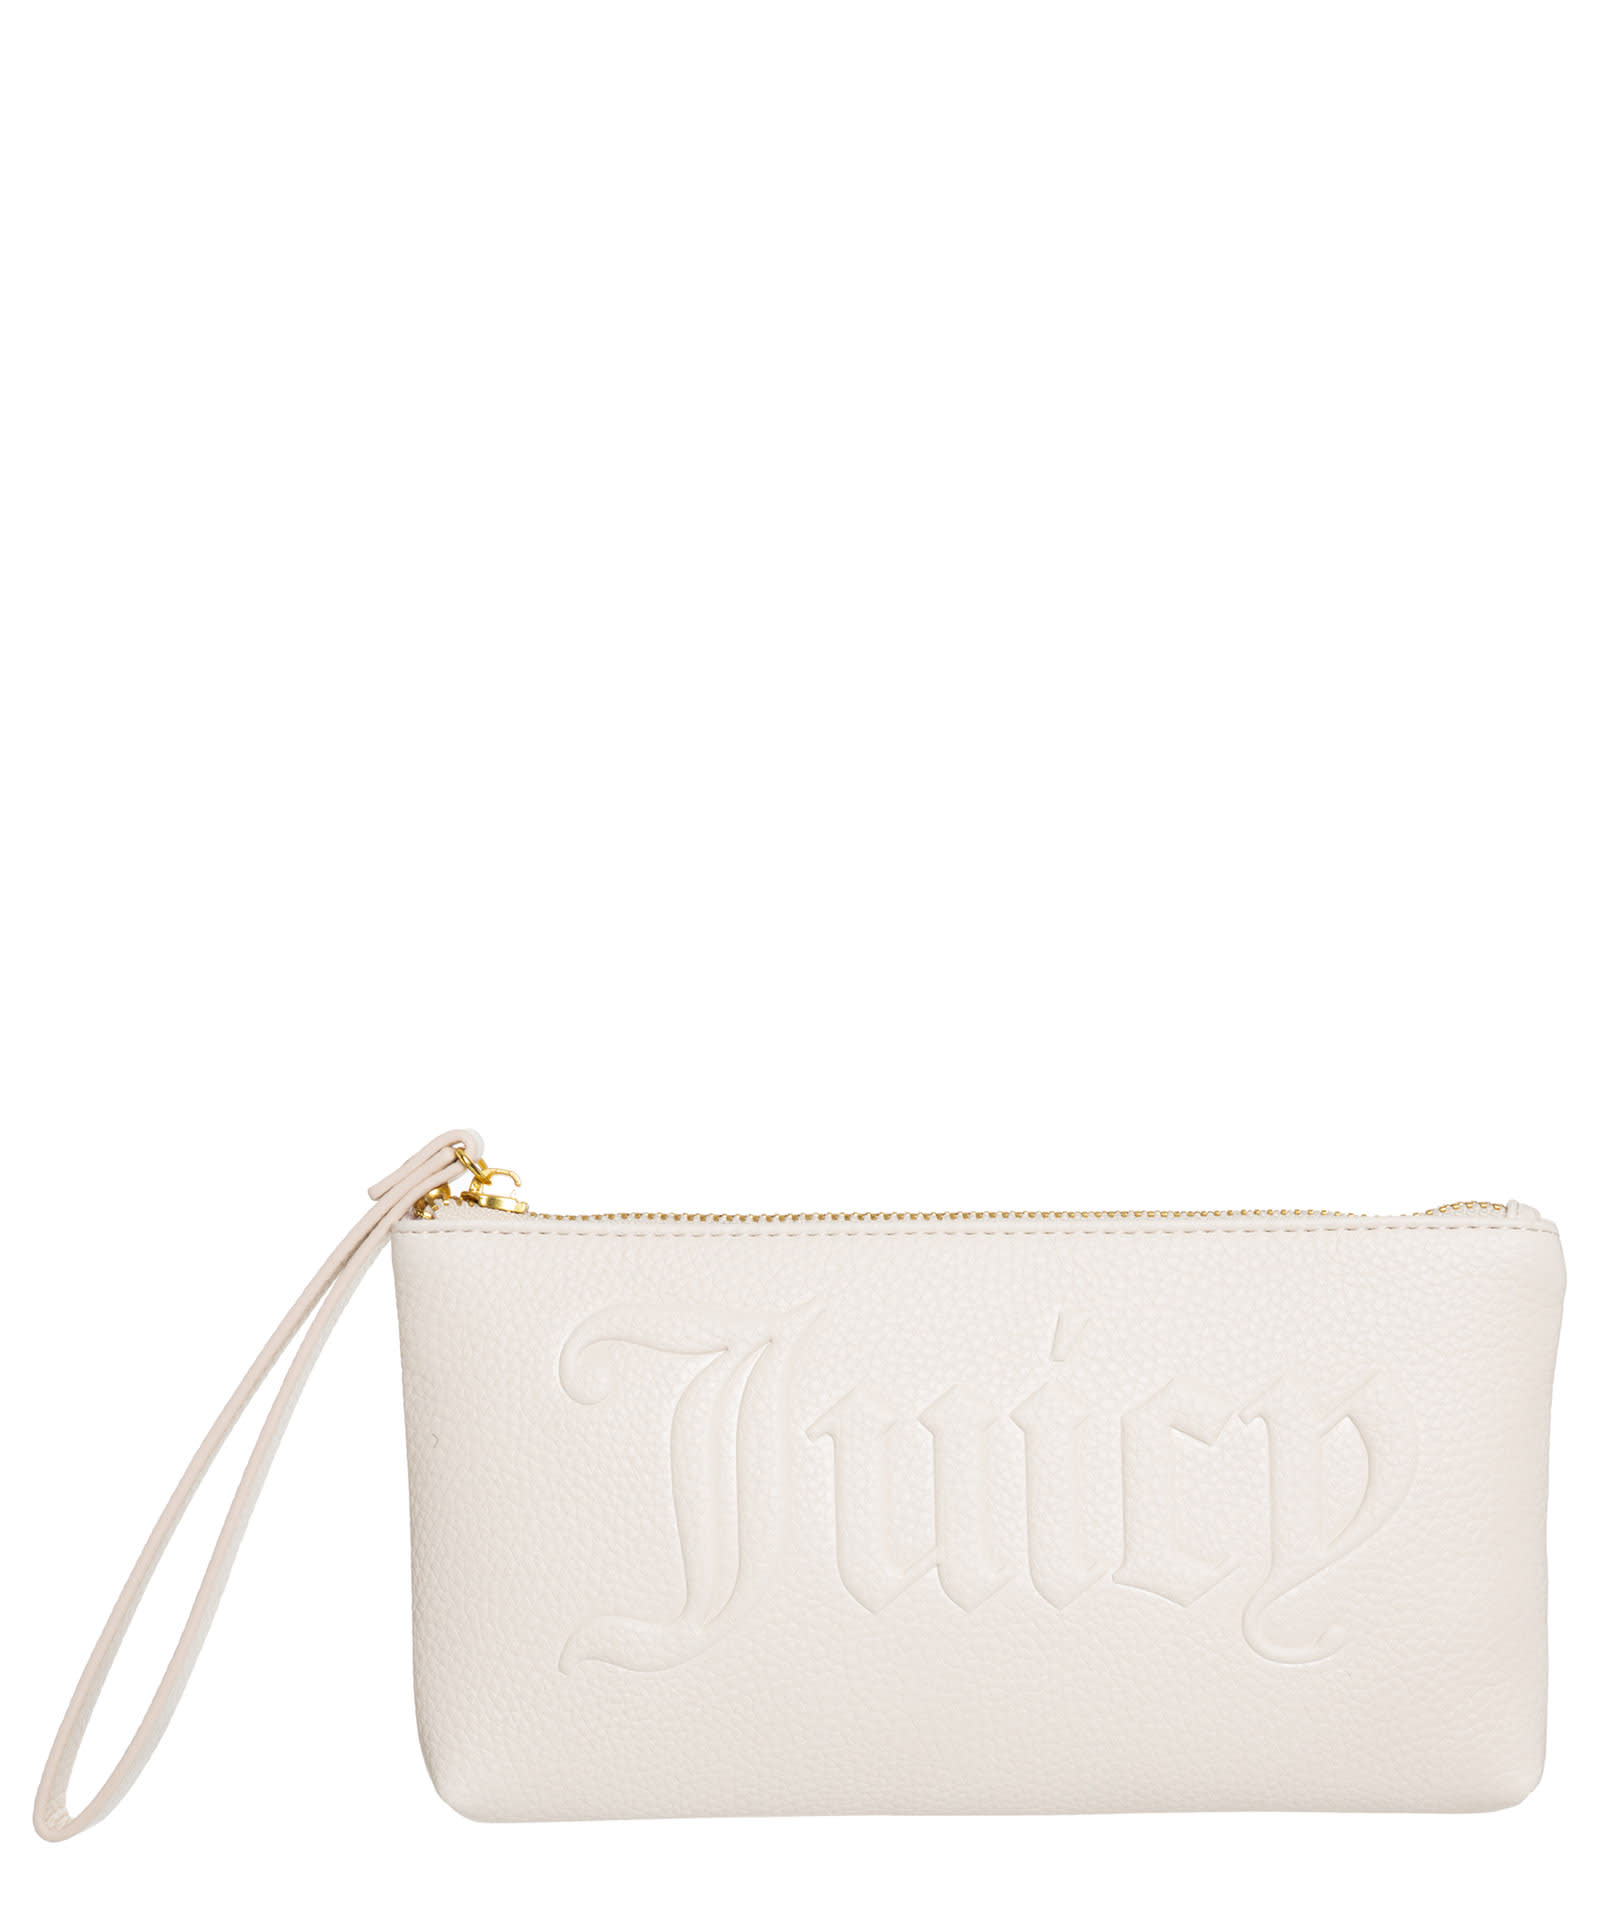 Juicy Couture Pouch